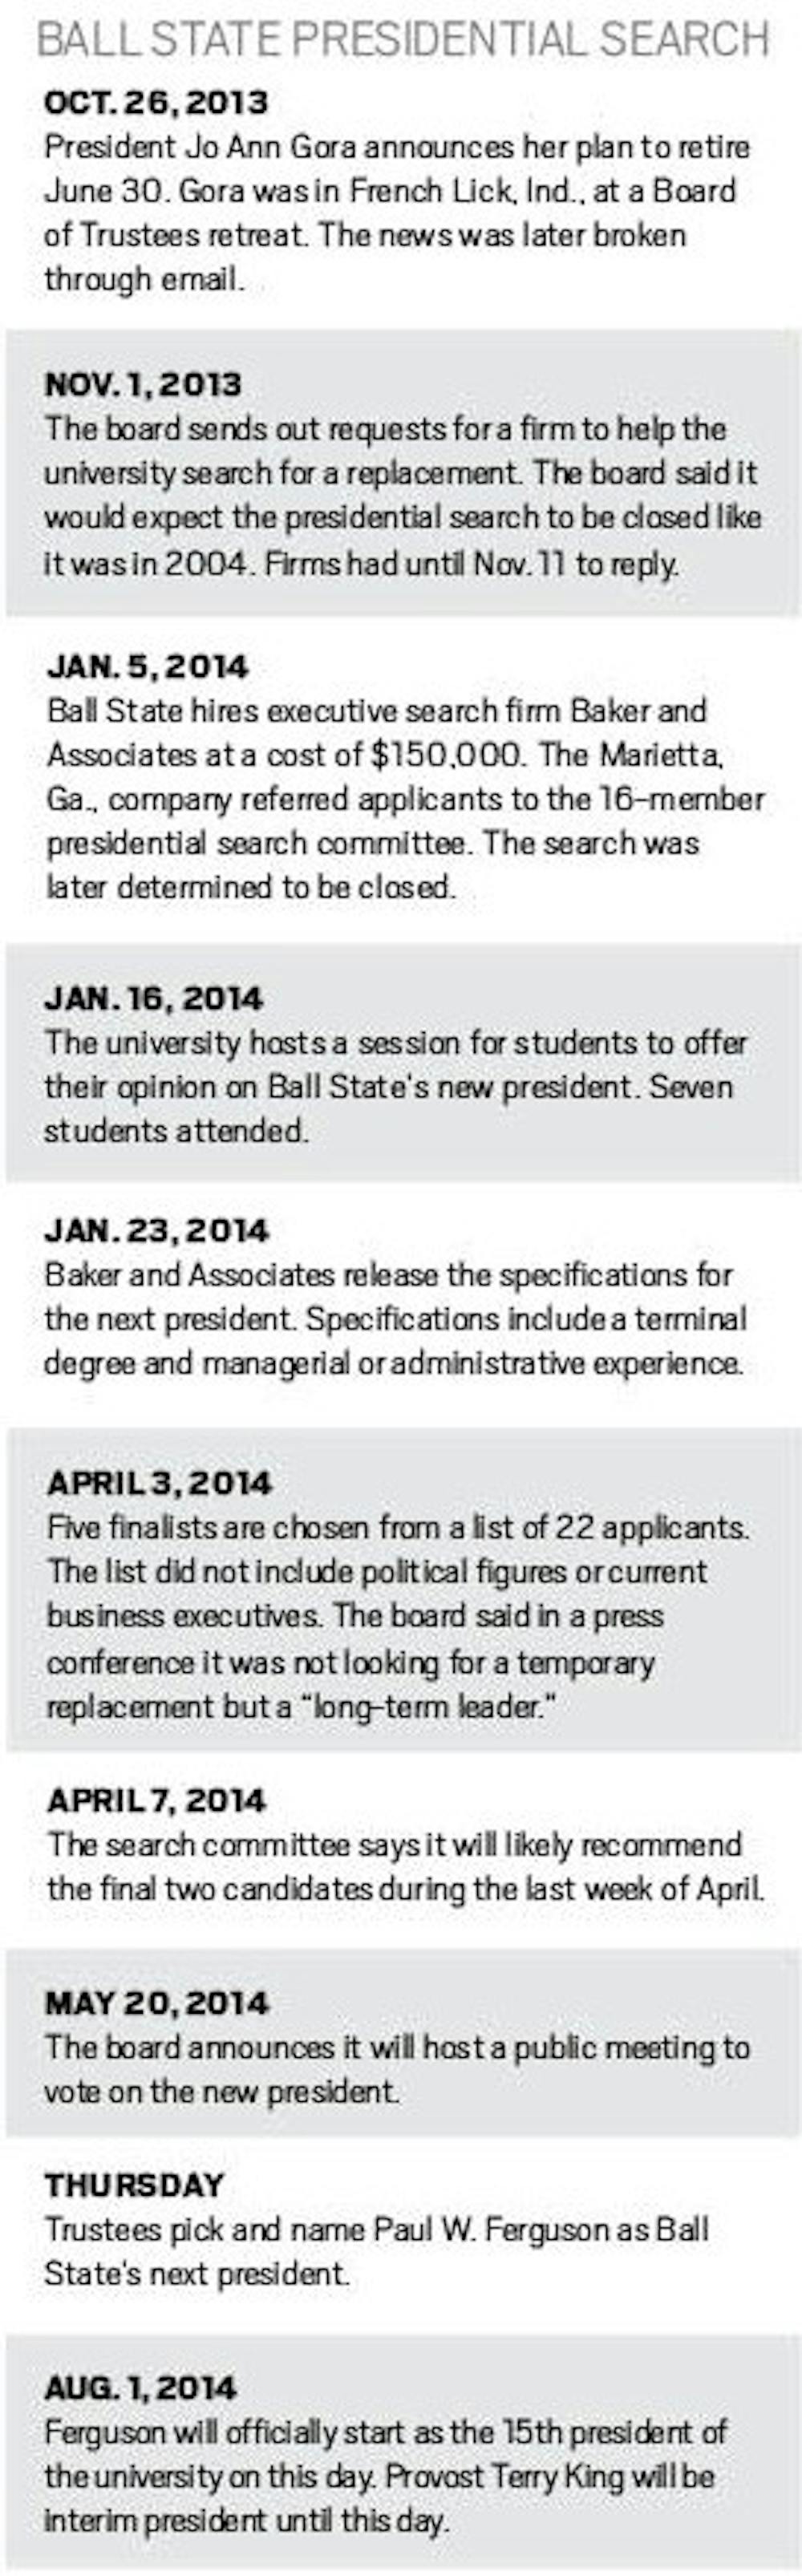 <p><strong>Ball State</strong> has searched for a replacement for retiring President Jo Ann Gora since November. See how the months unfolded. <strong>DN STAFF REPORTS</strong></p>